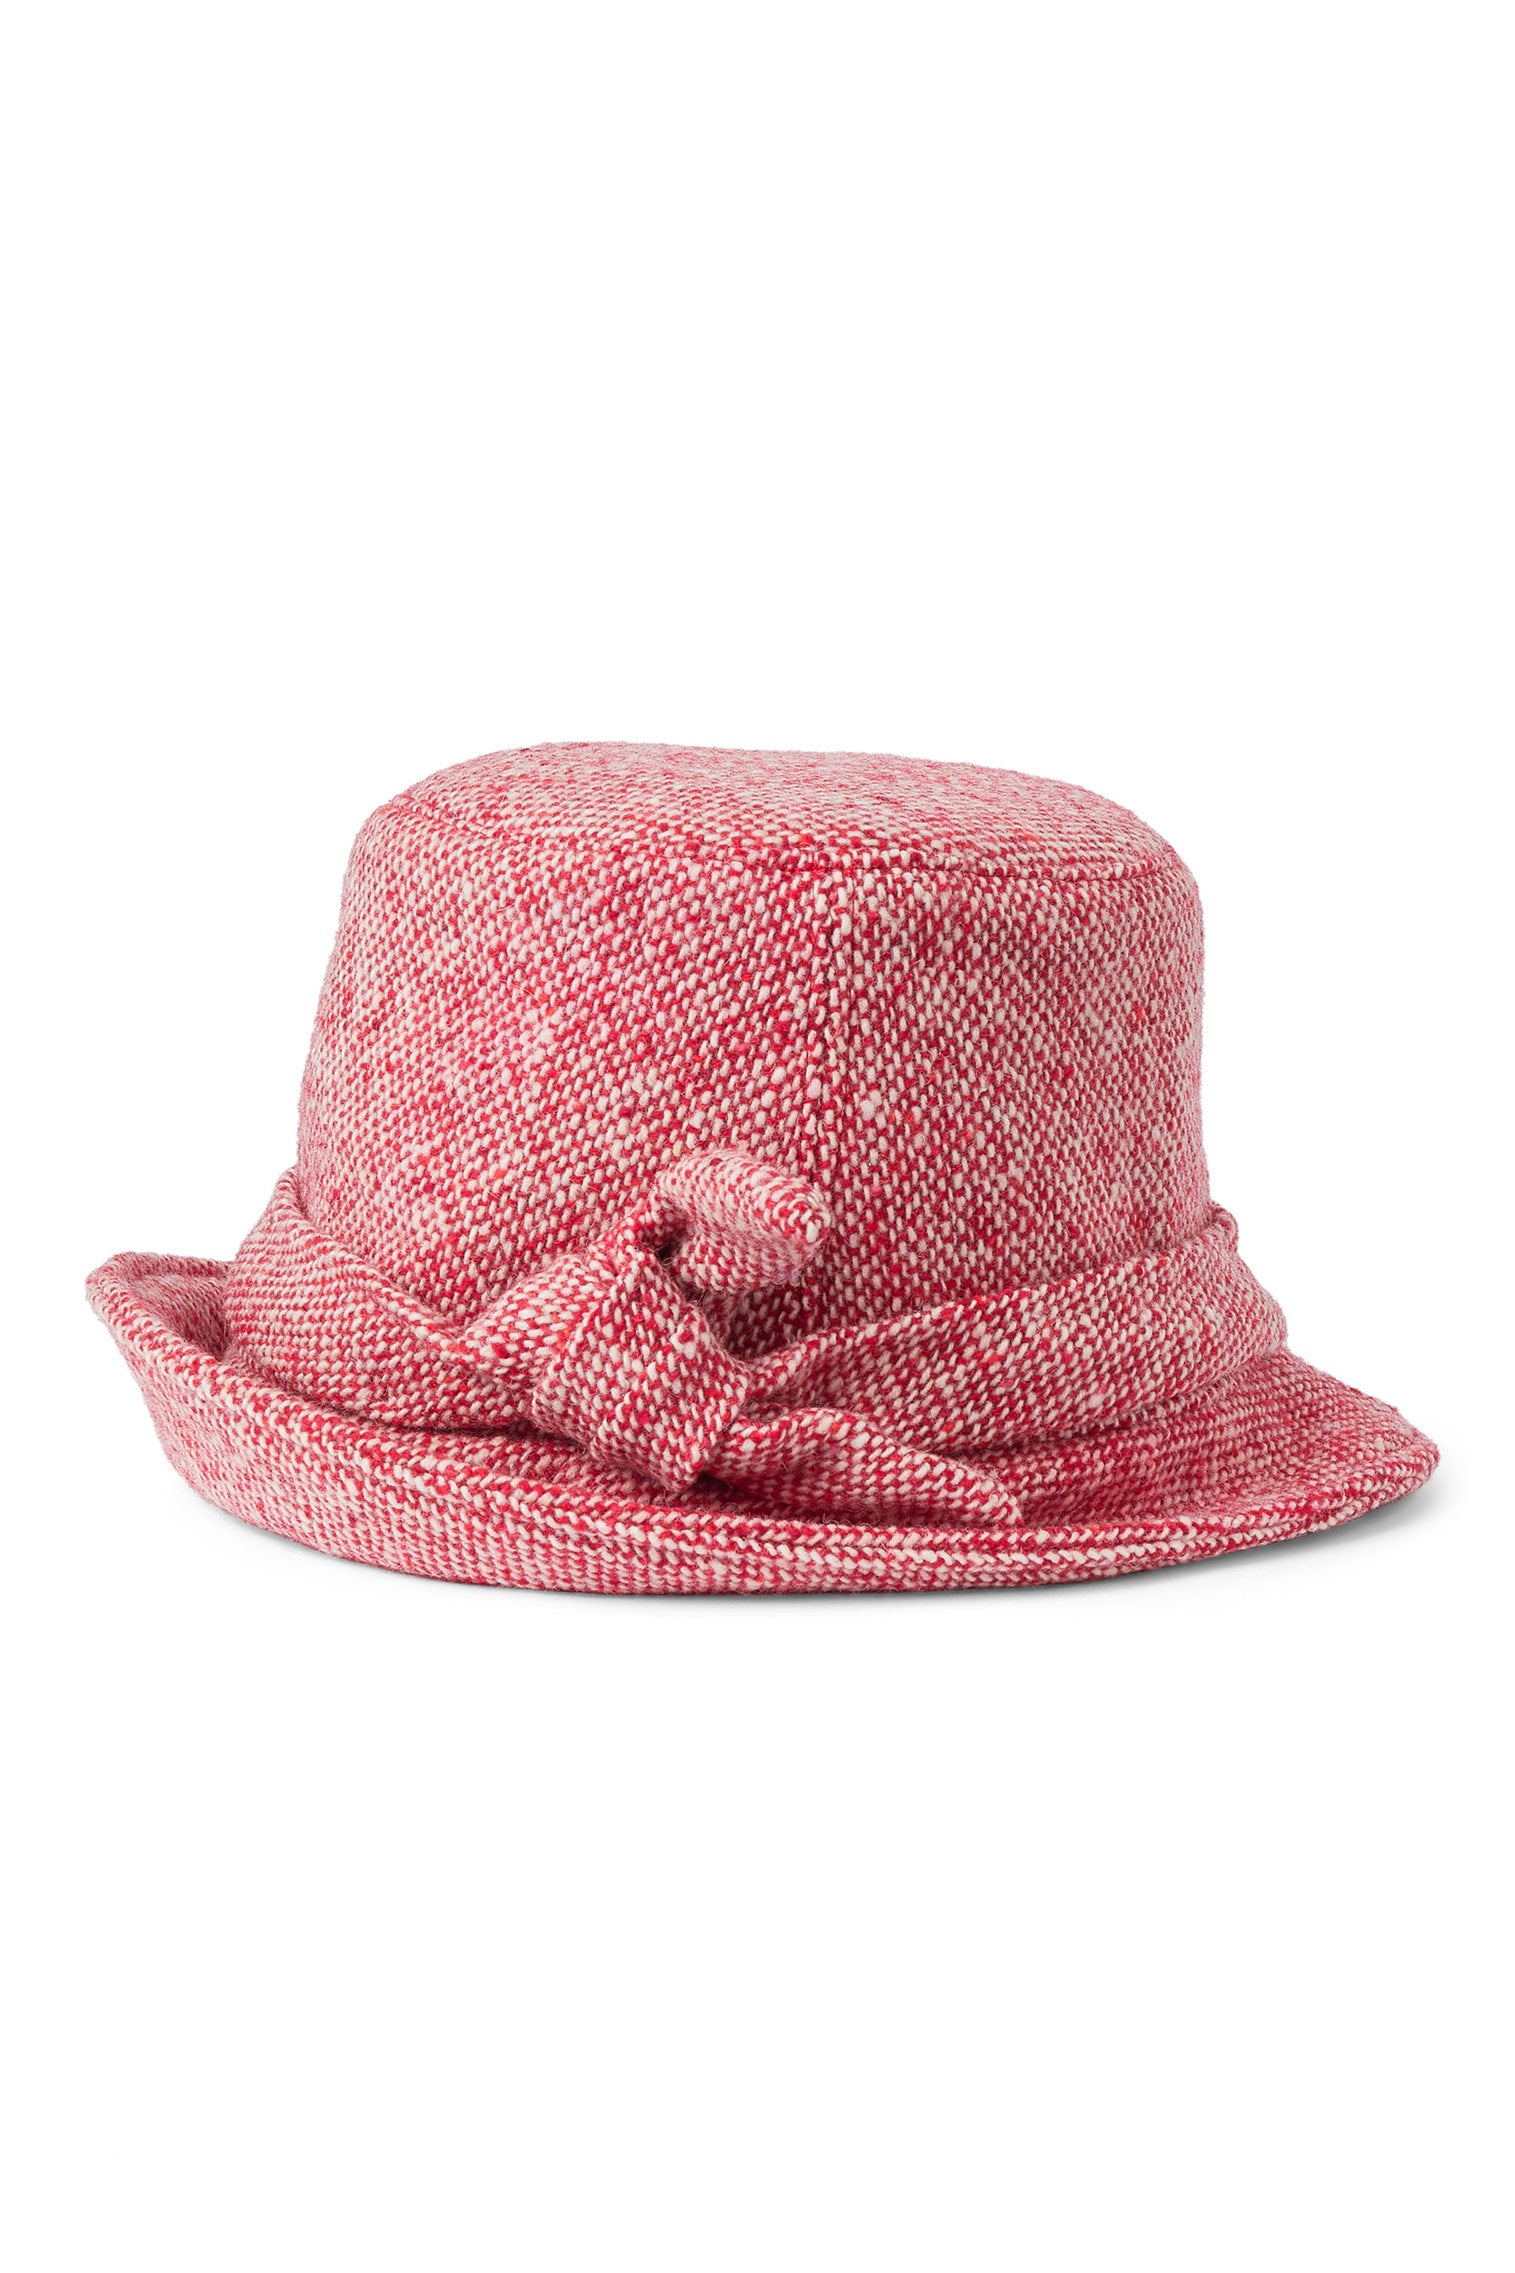 Dolores Red Cloche - Products - Lock & Co. Hatters London UK